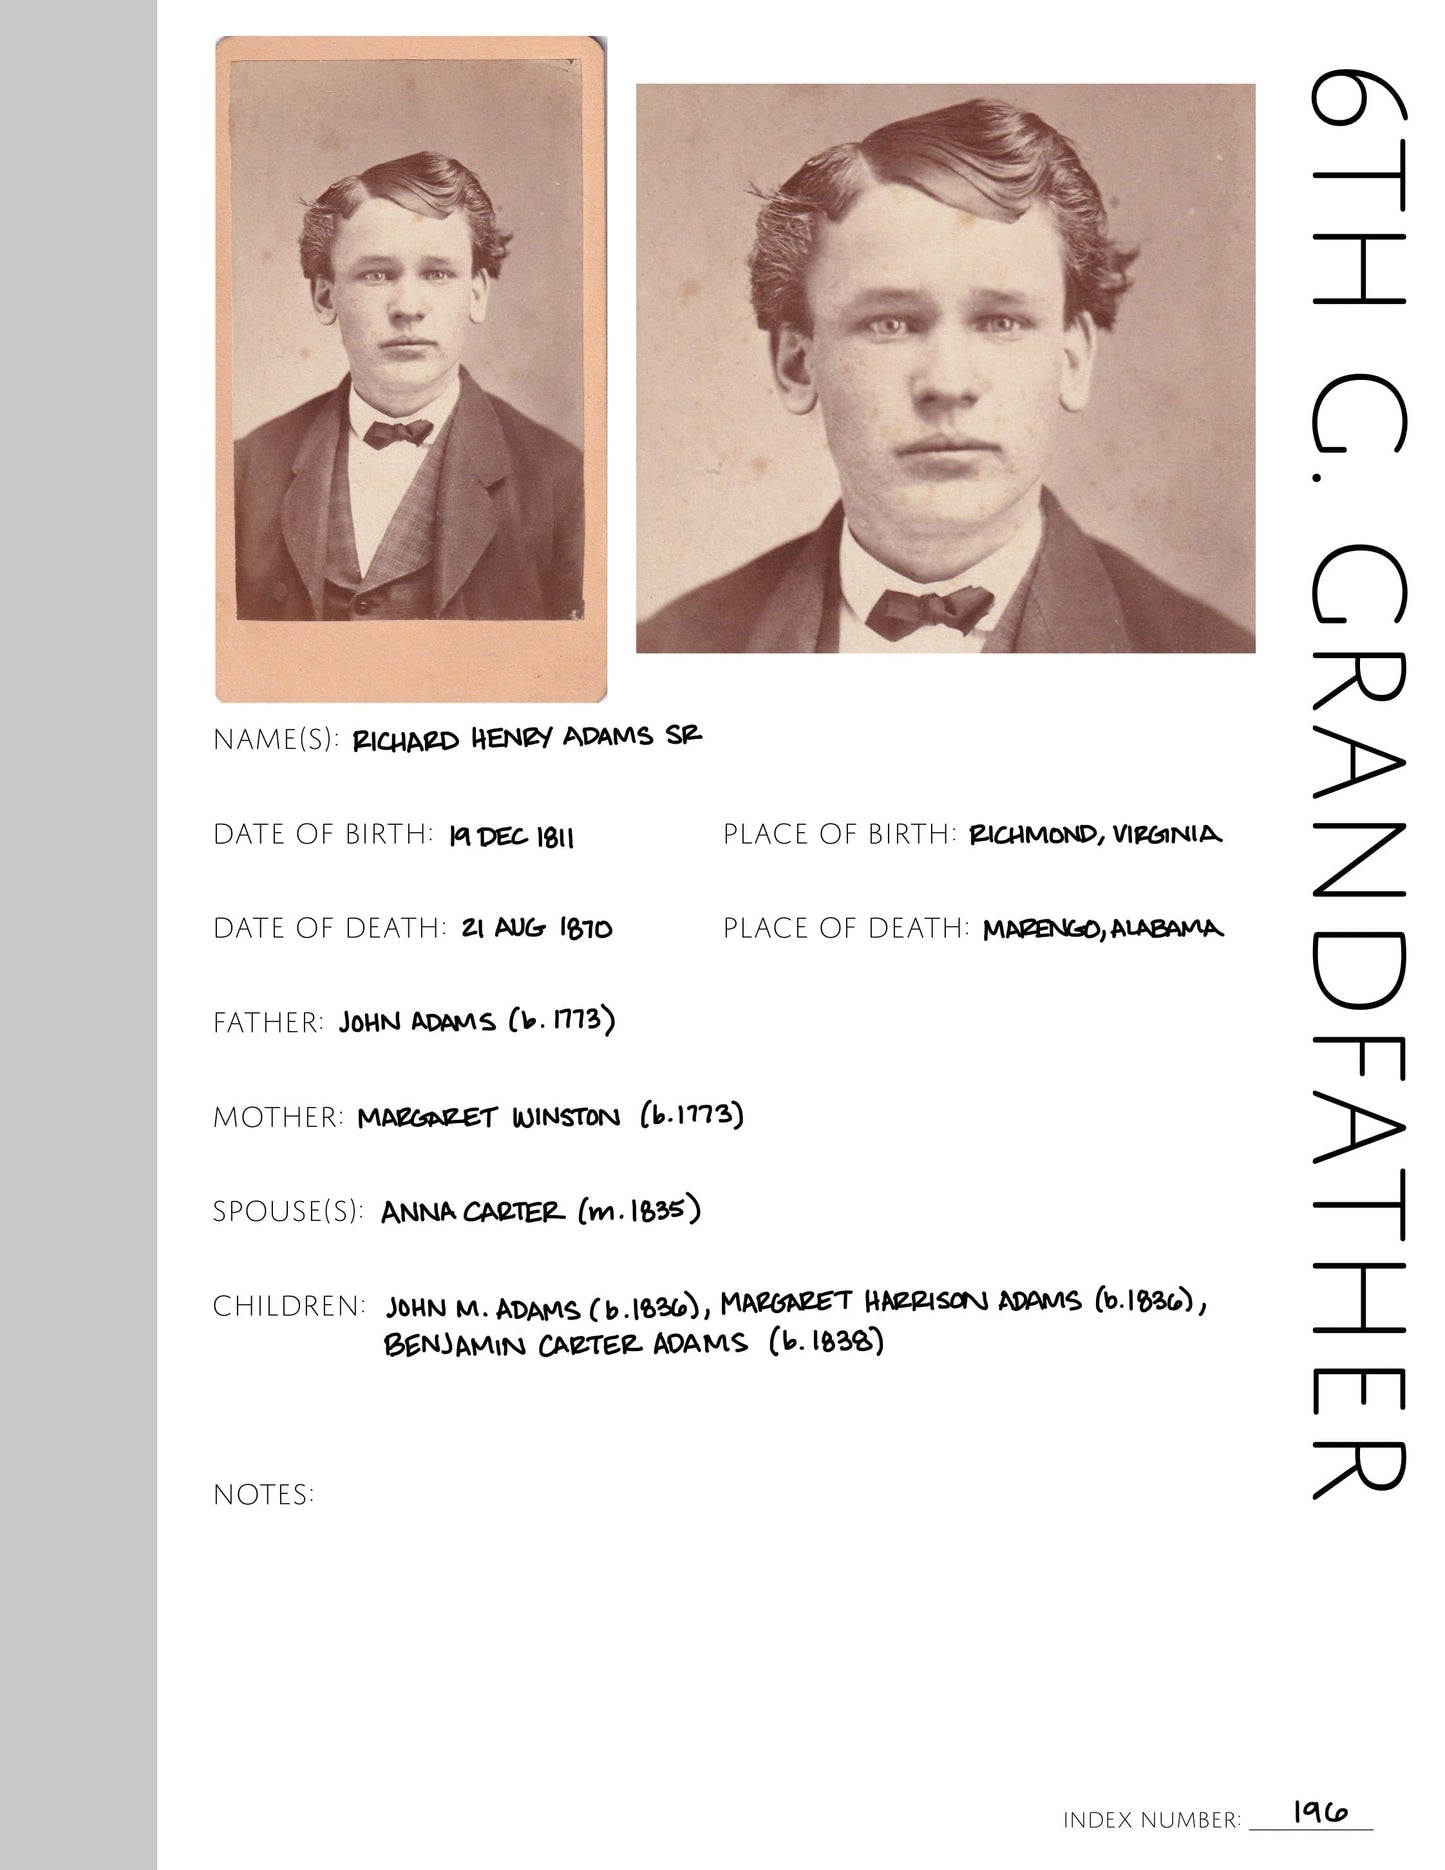 6th Great Grandfather Profile: Printable Genealogy Form (Digital Download)